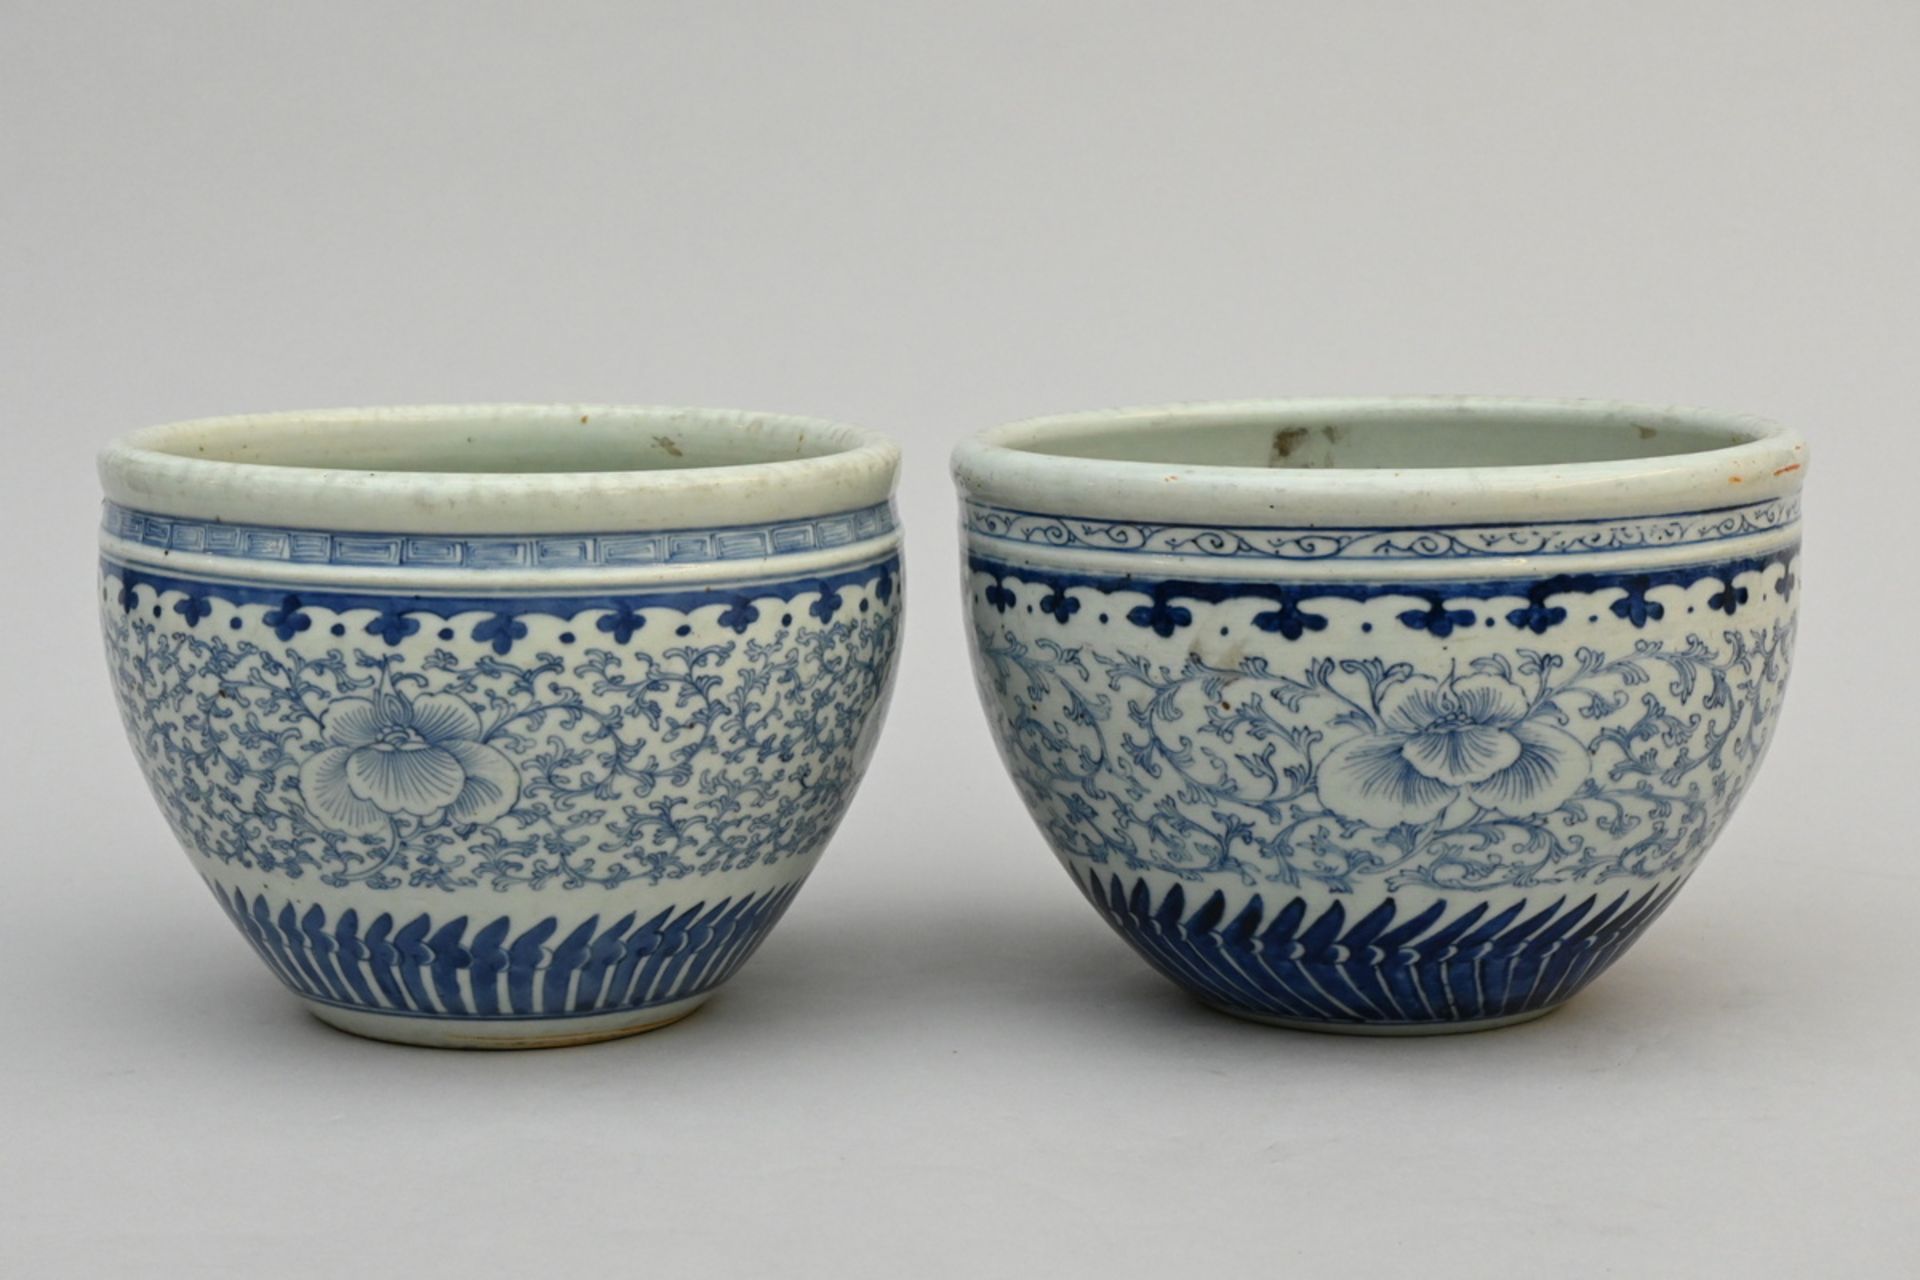 Two Chinese planters in blue and white porcelain, 19th century (dia 26-27.5cm)